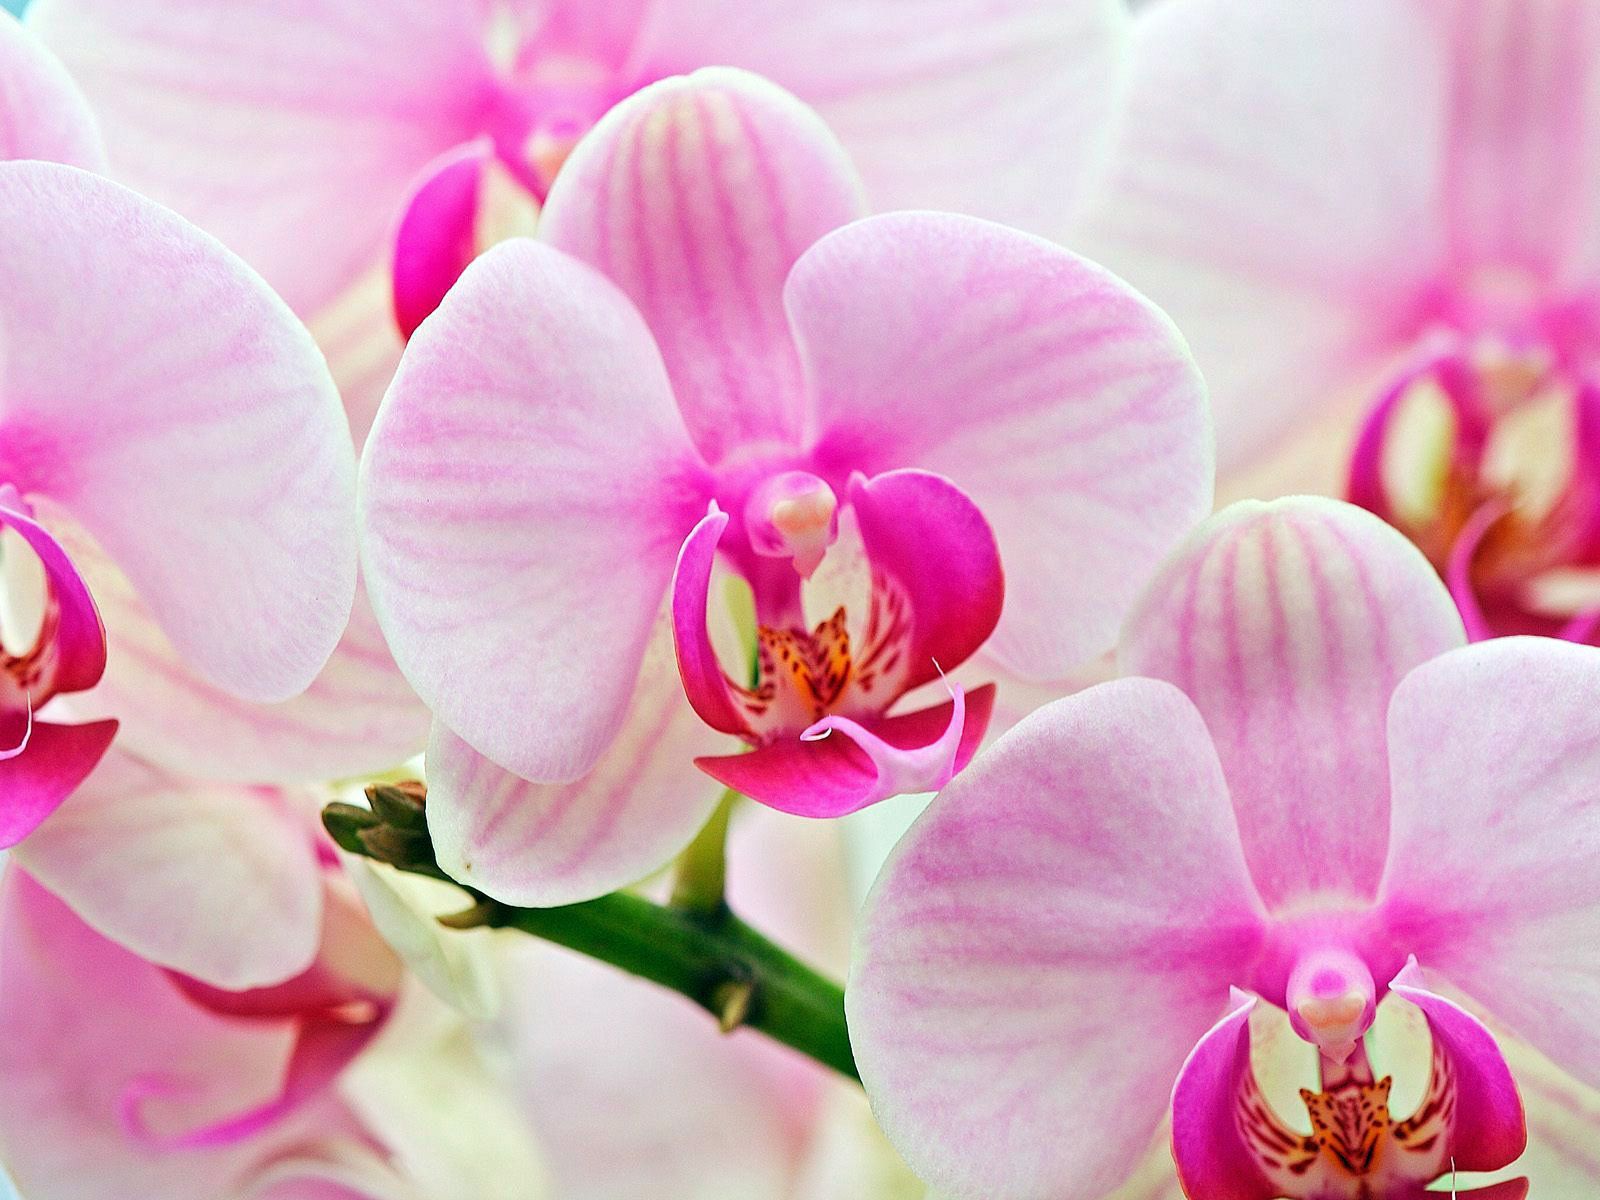 picture of orchid flowers. Flowers orchid. Orchid flower, Most